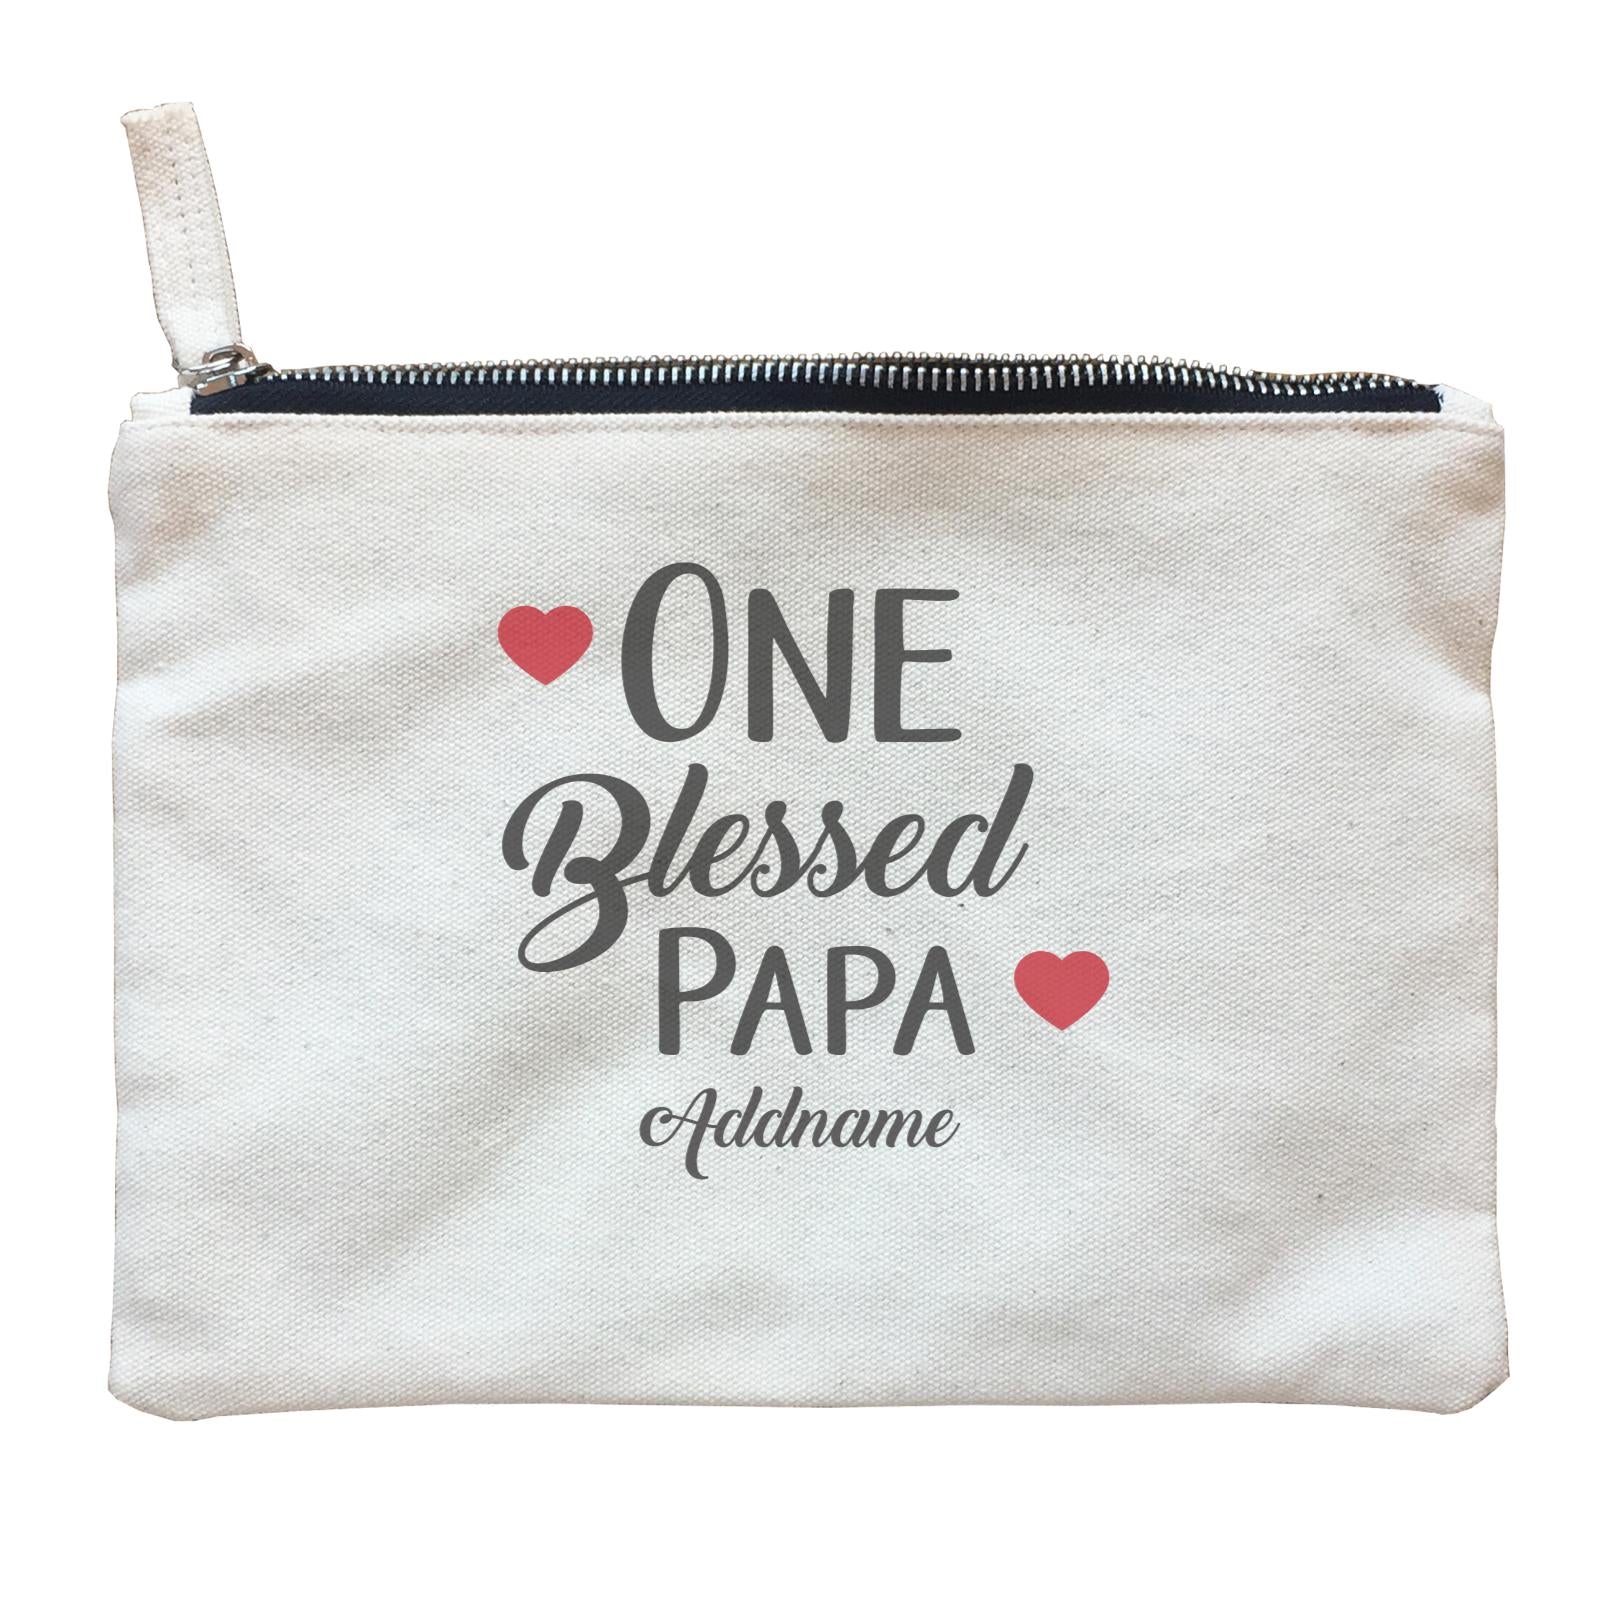 Christian Series One Blessed Papa Addname Zipper Pouch